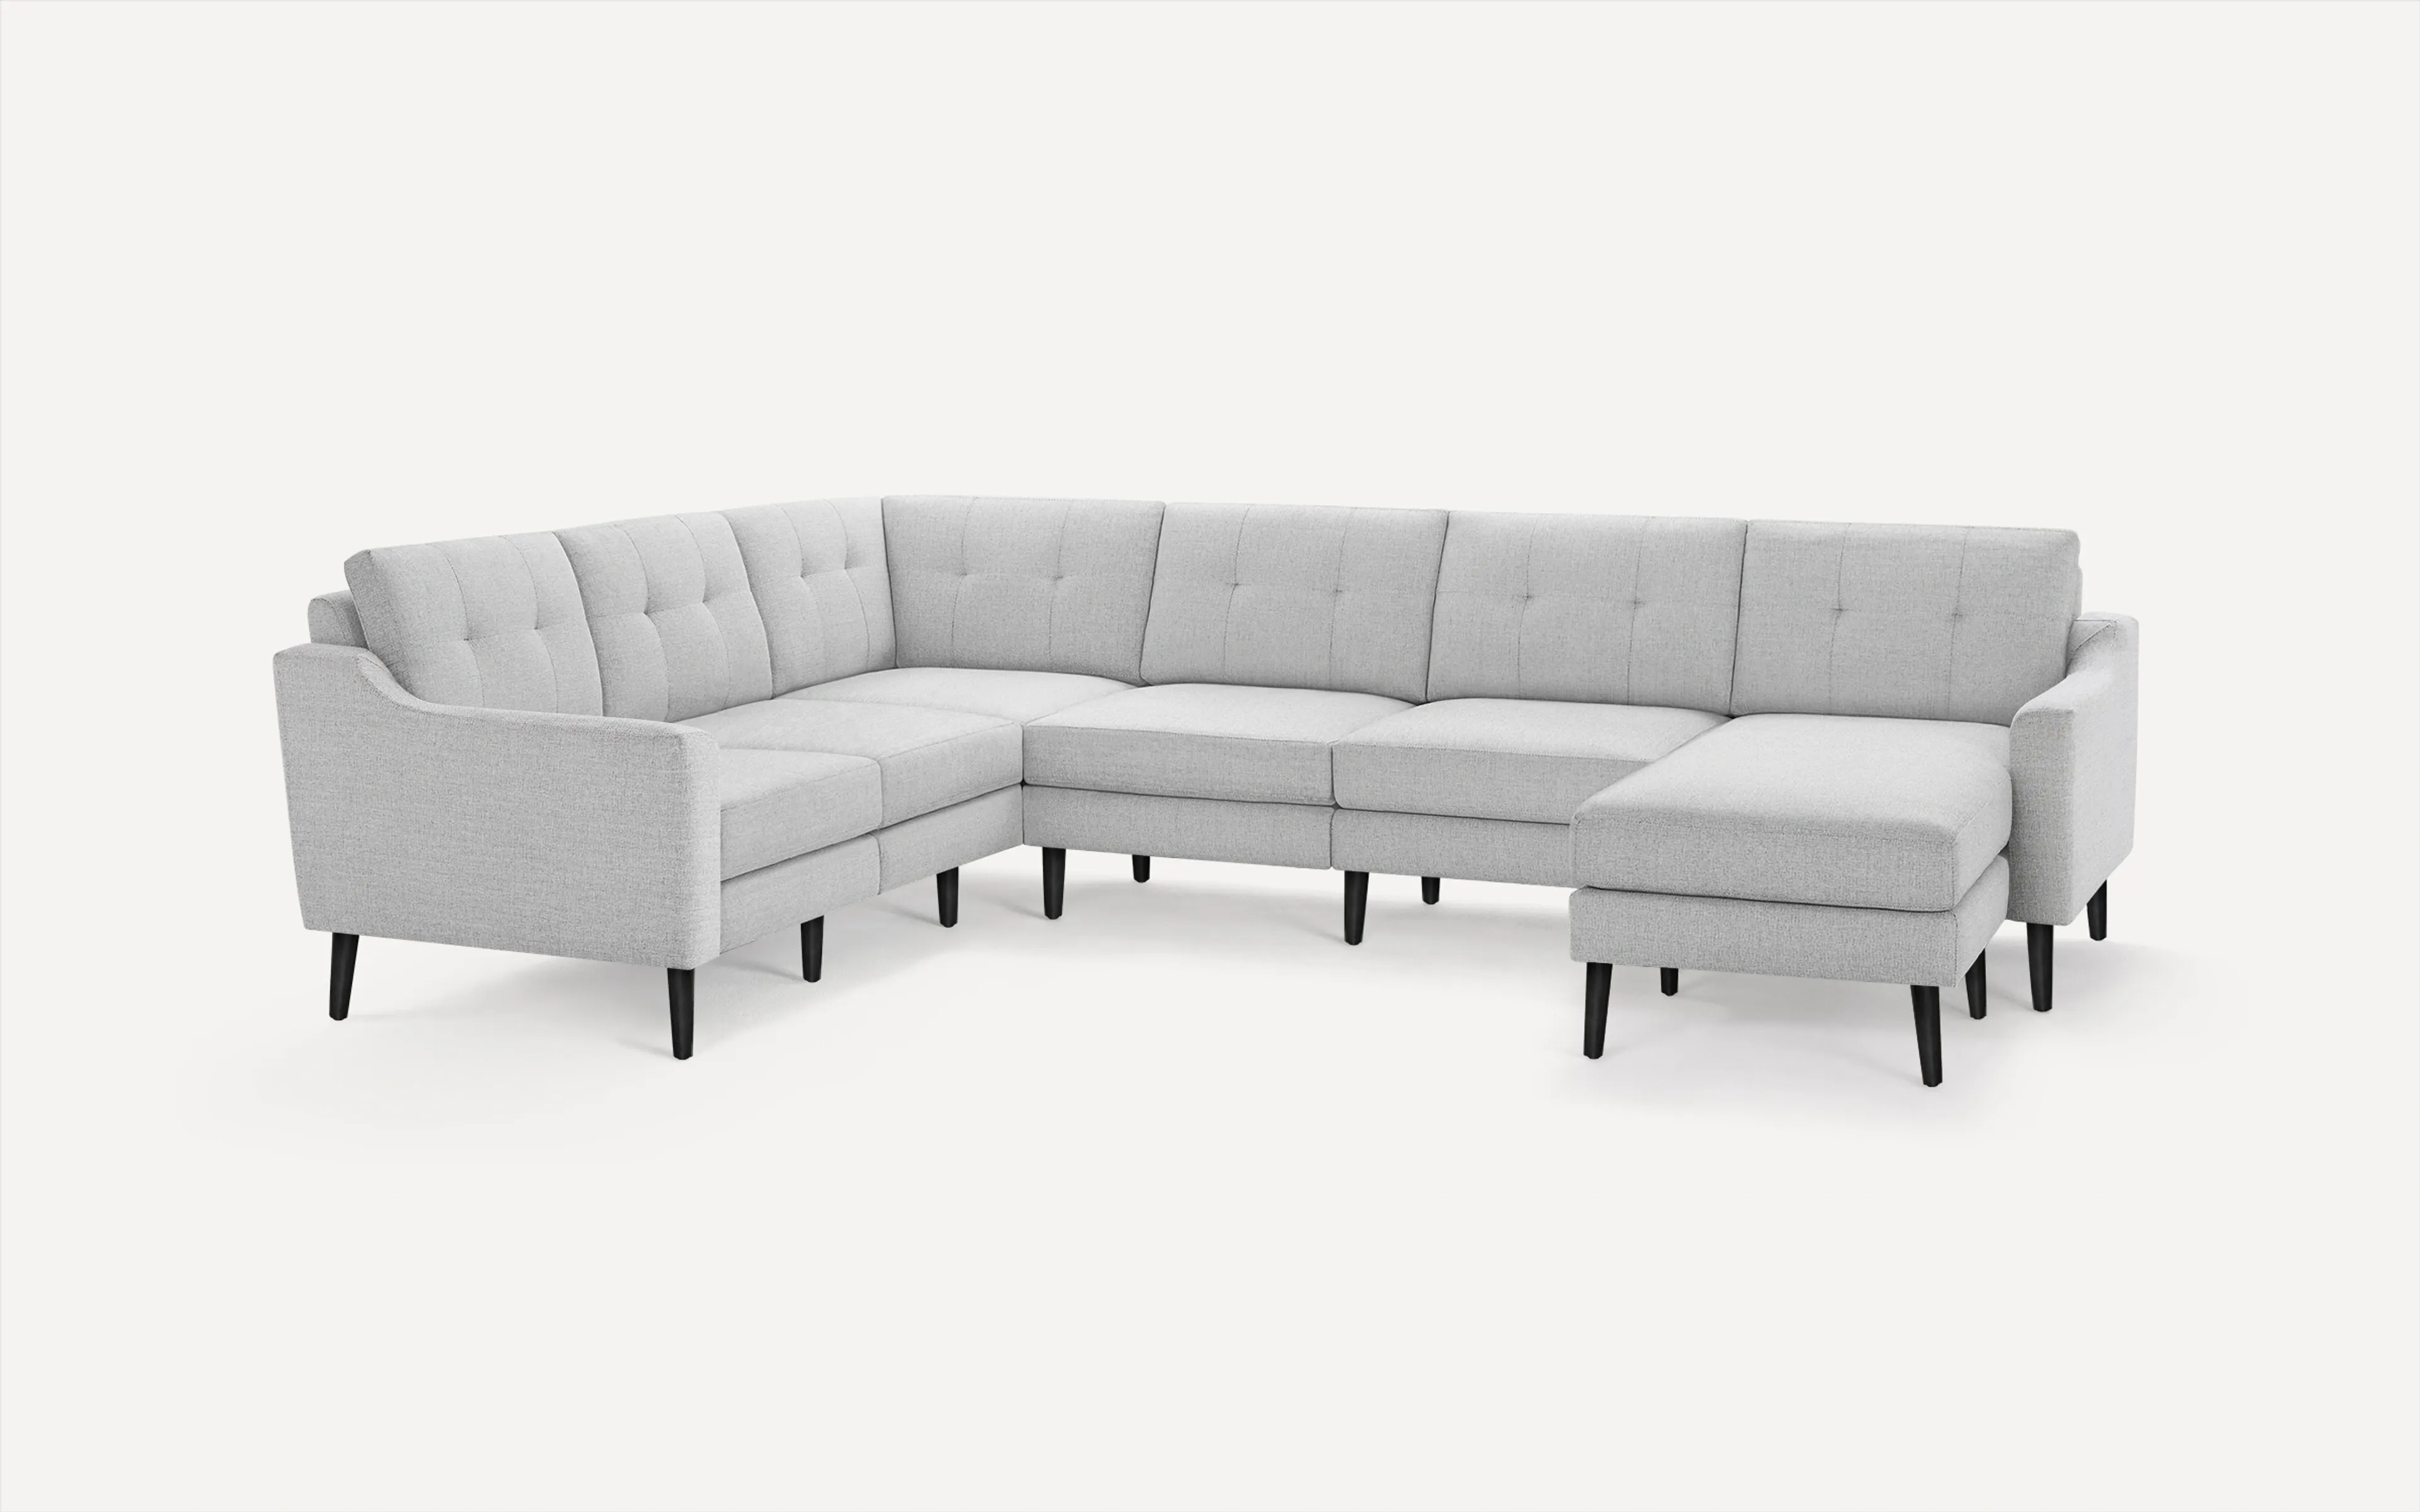 Slope Nomad 6-Seat Corner Sectional with Chaise